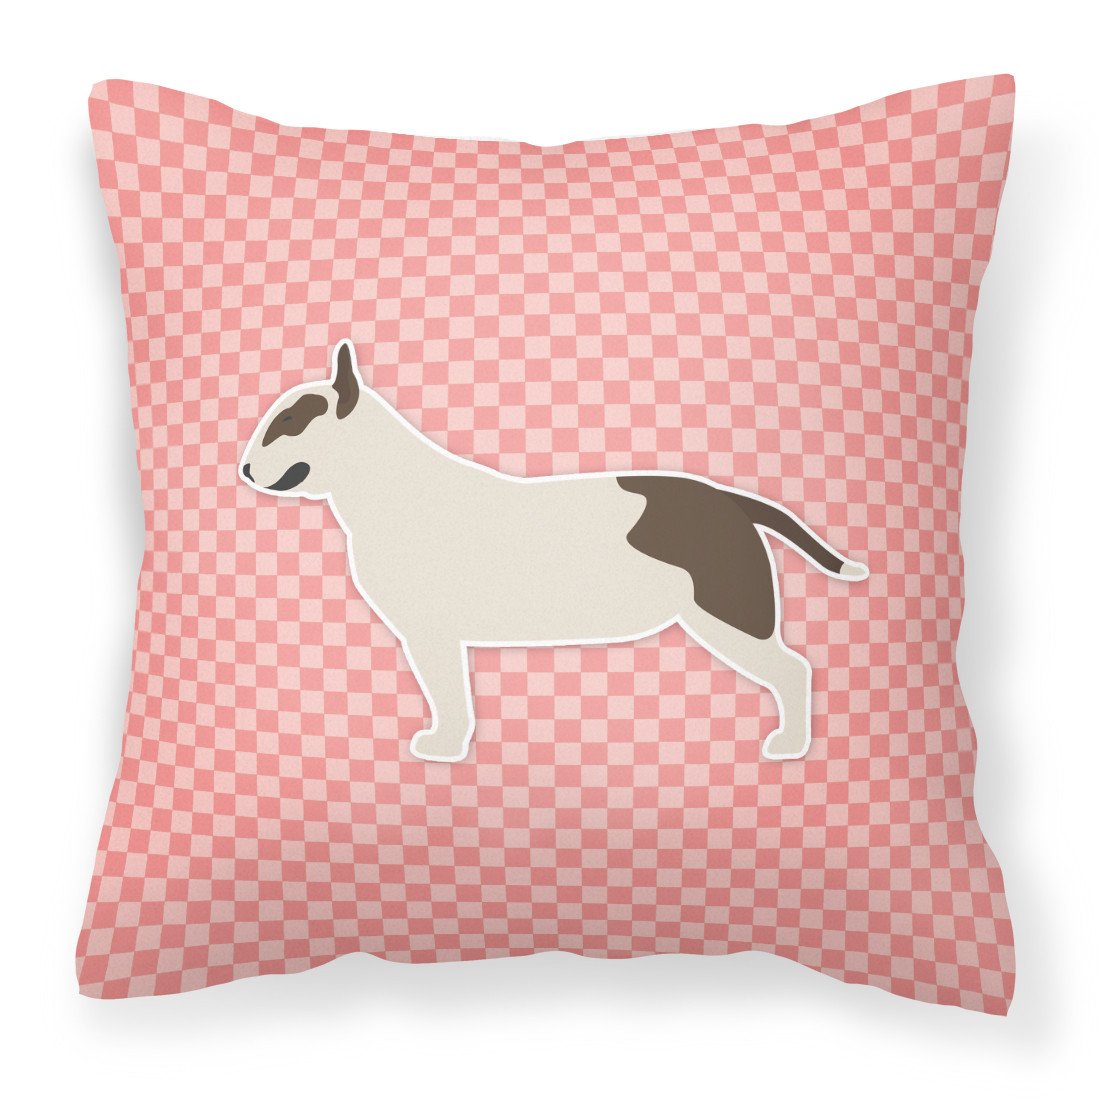 Bull Terrier Checkerboard Pink Fabric Decorative Pillow BB3678PW1818 by Caroline's Treasures